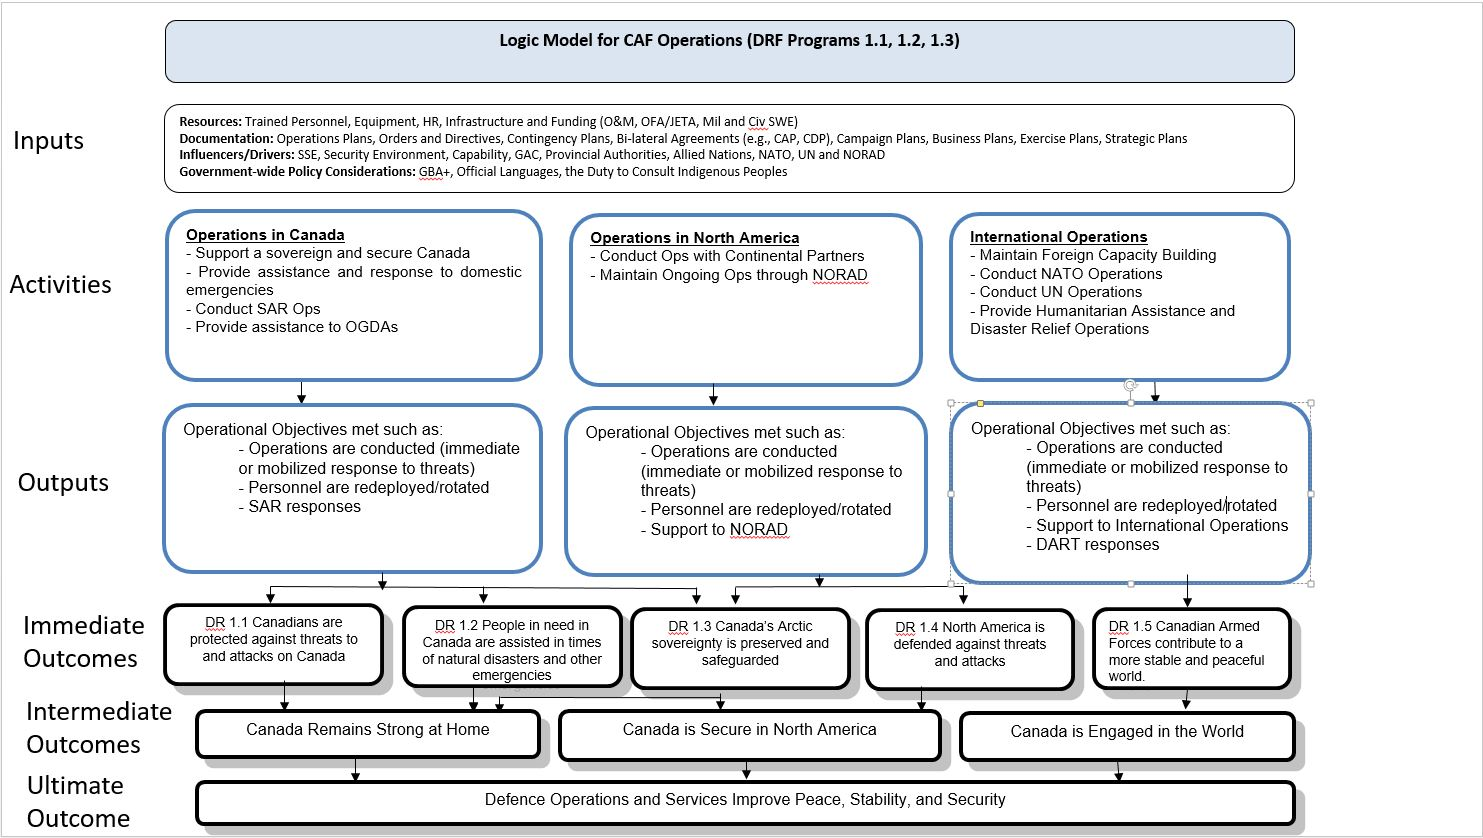 Flow Chart of the inputs, activities, outputs and outcomes of the program.